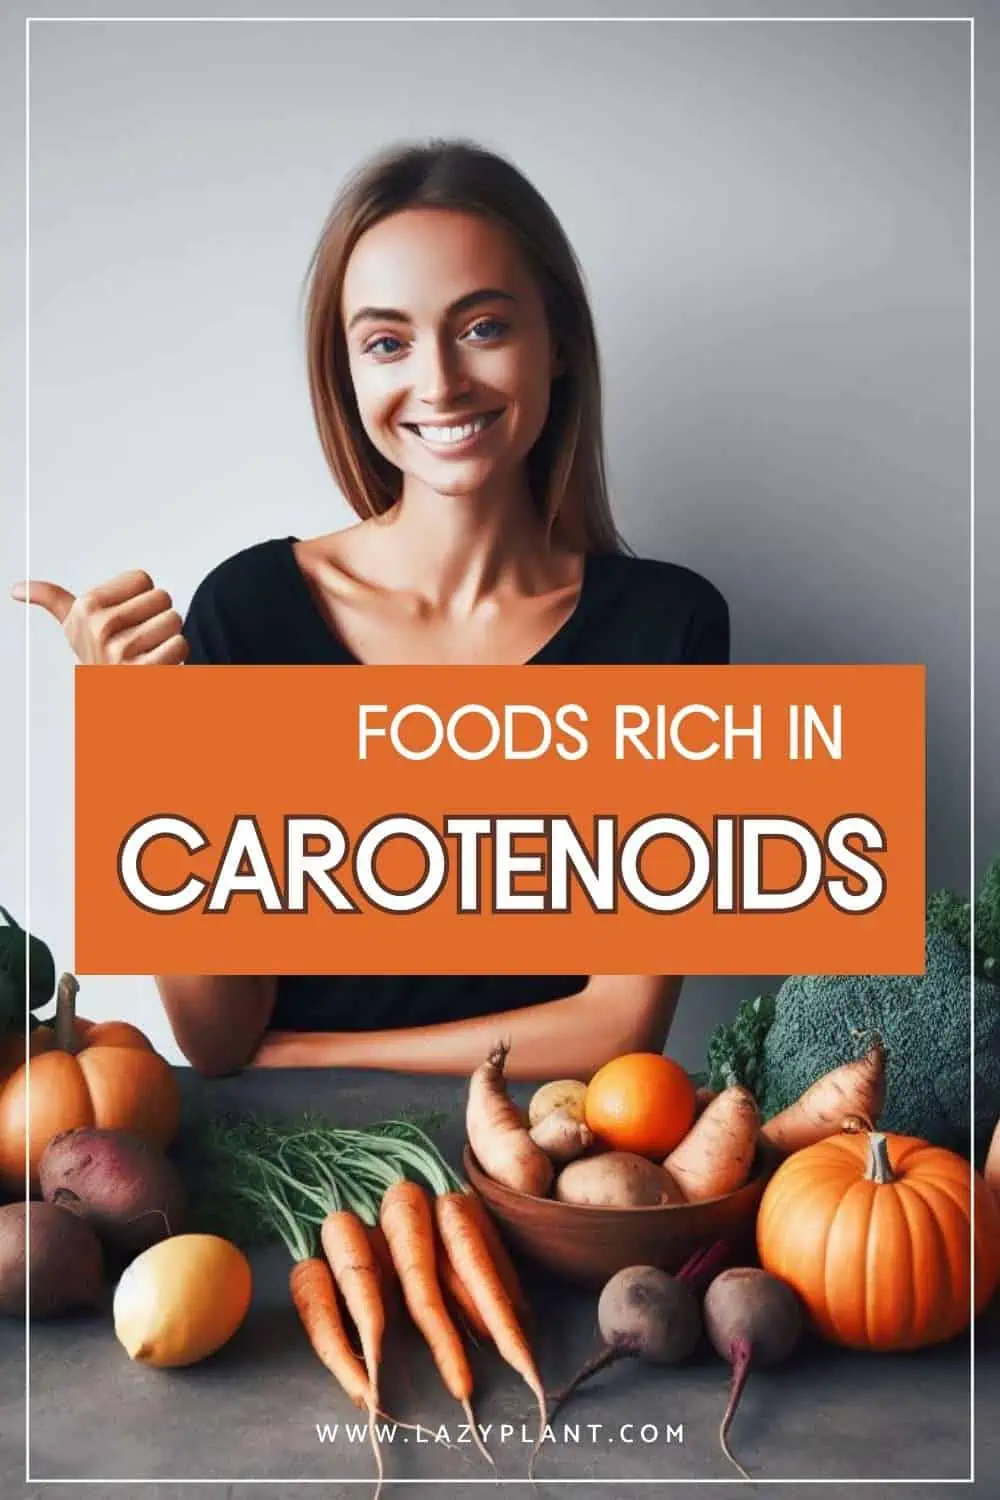 What are the richest foods in carotenoids?